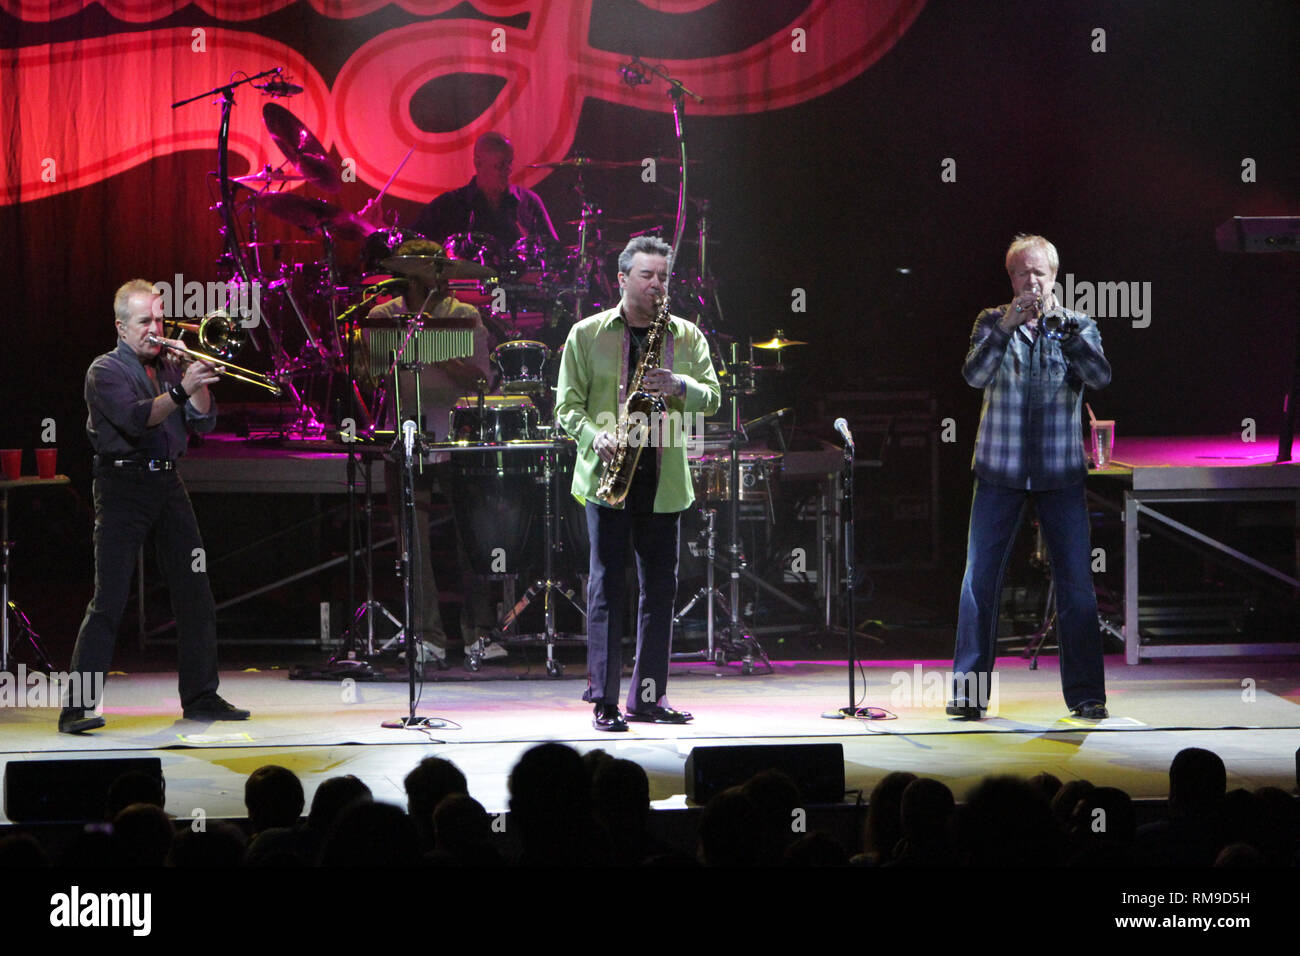 Chicago band members are shown performing on stage during a 'live' concert appearance. Stock Photo